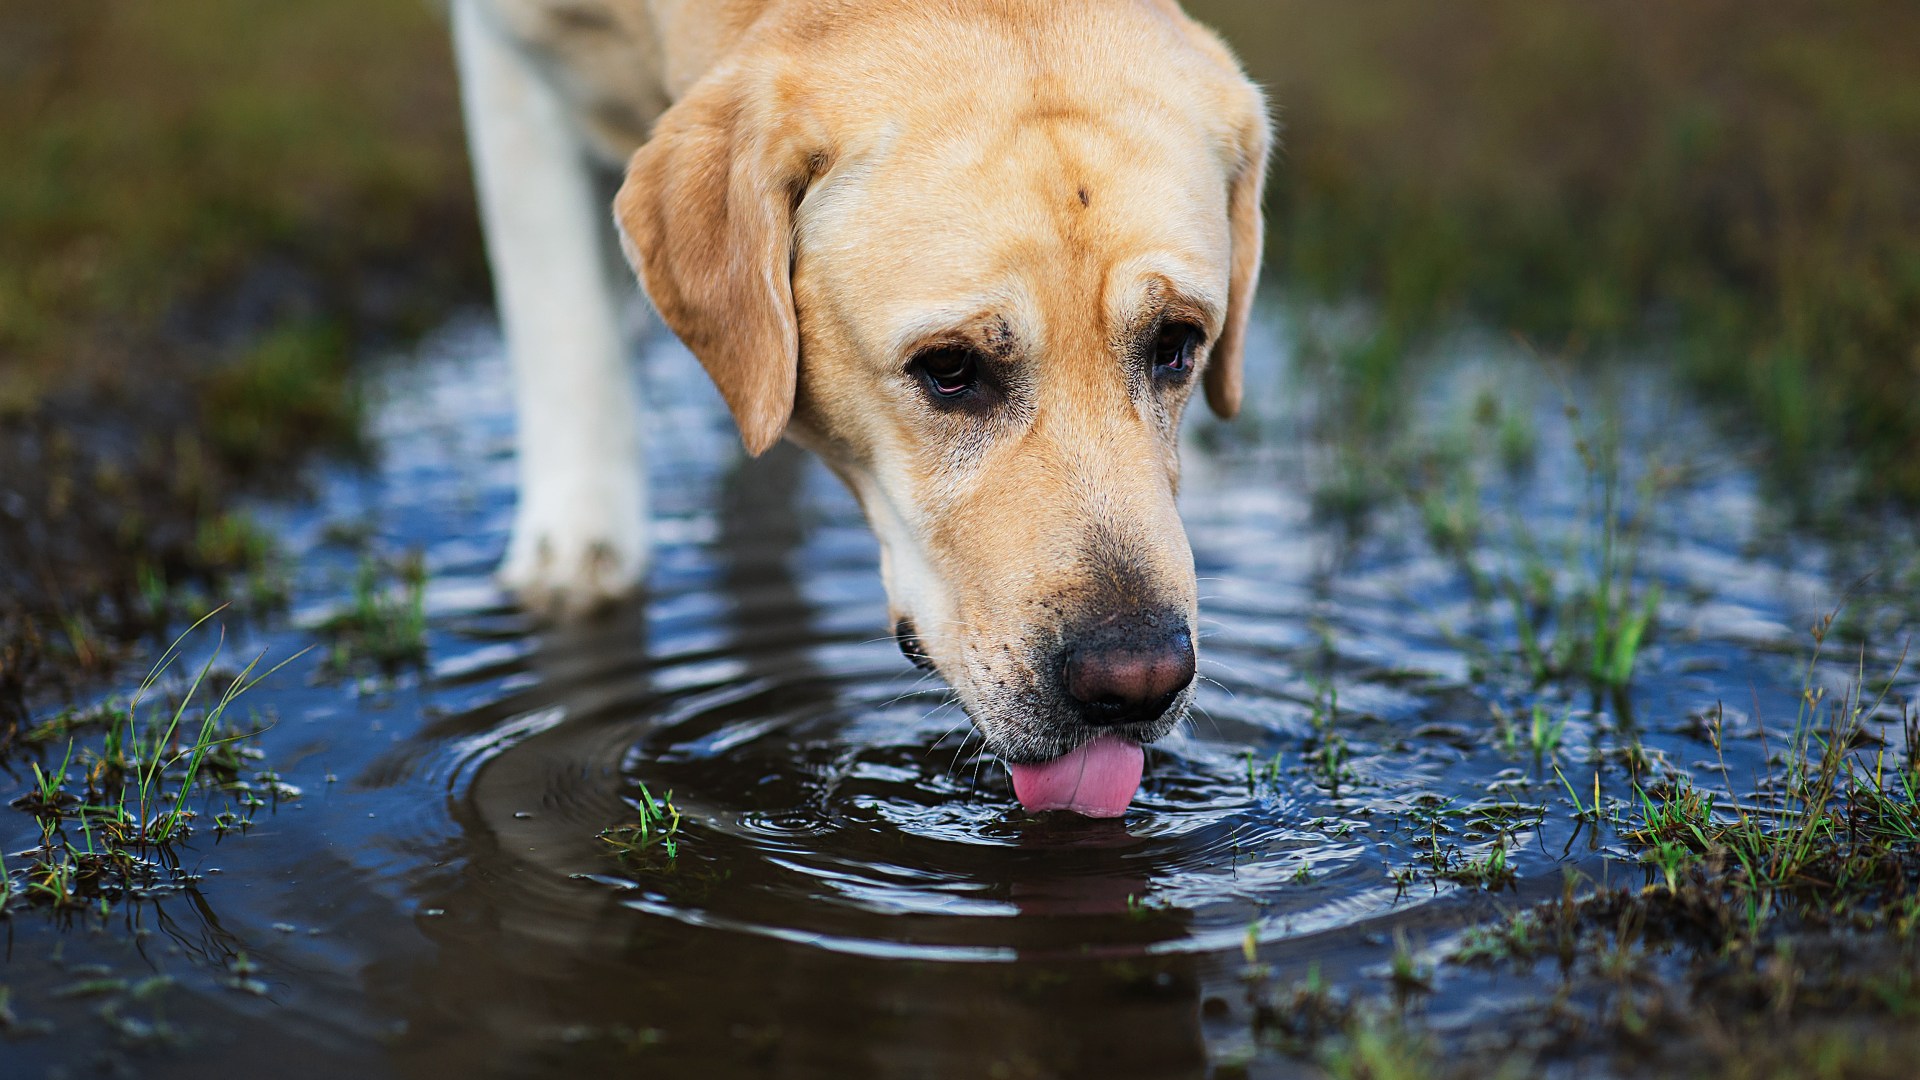 Deadly Risk: Puddles Could Kill Your Pet, Urgent Warning